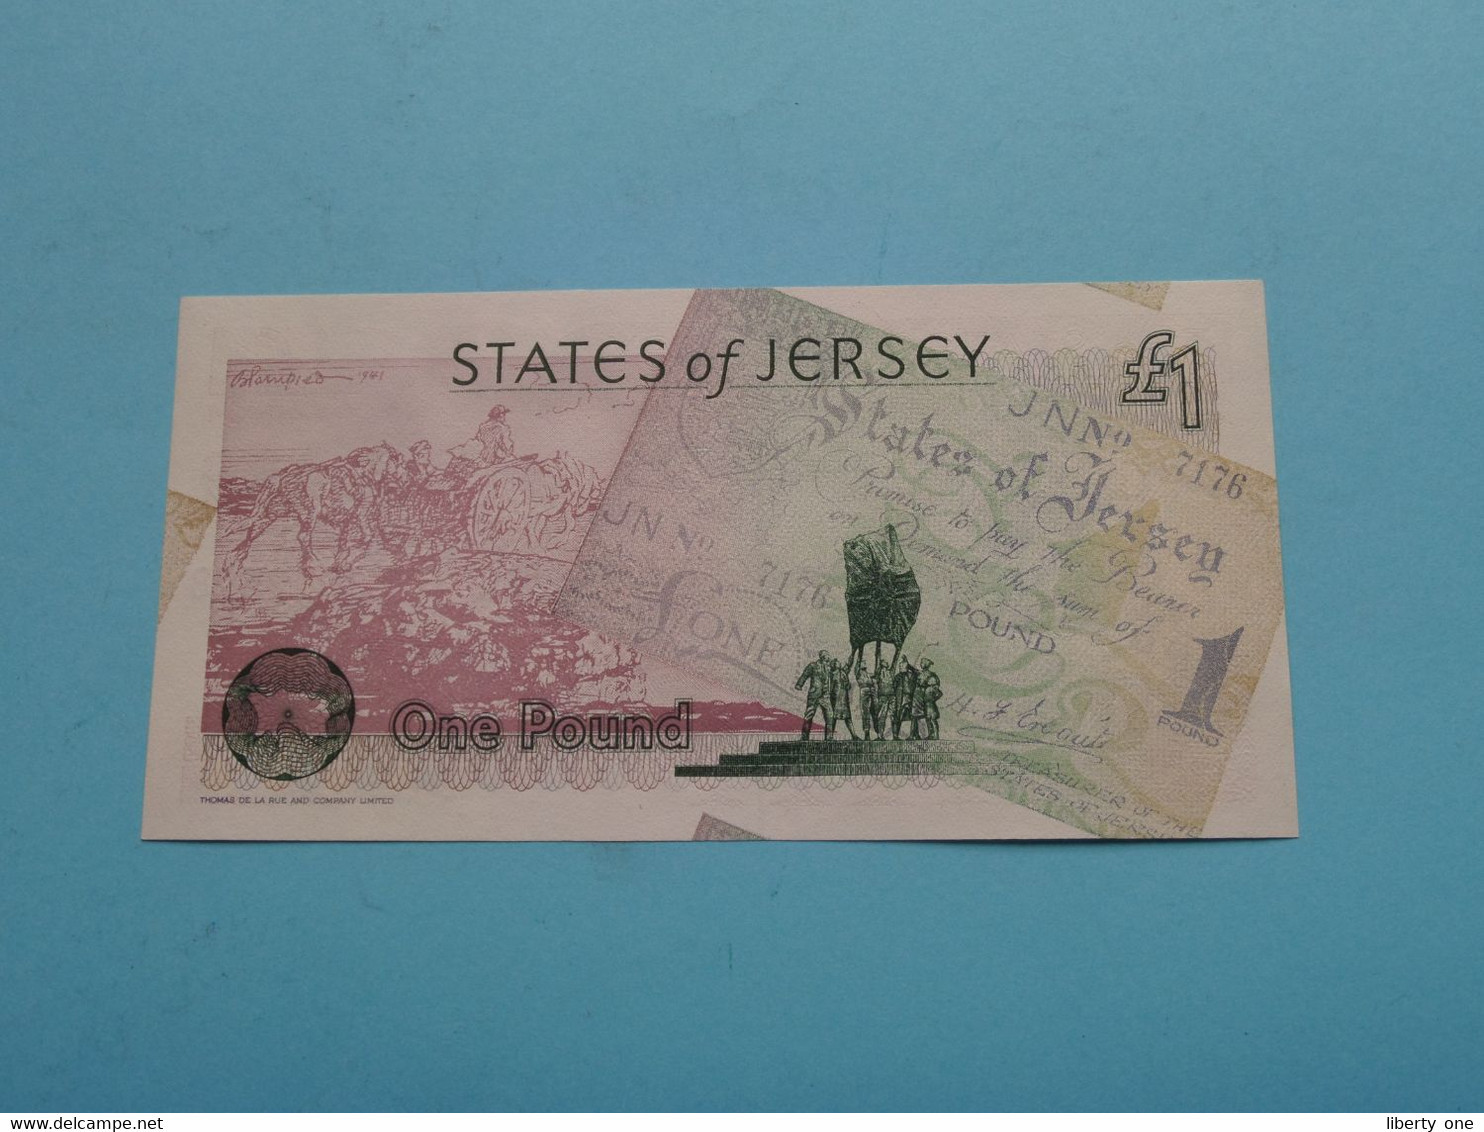 One POUND > 50th Anniversary LIBERATION Of JERSEY 9th May 1995 ( LJ012528 ) ( For Grade, Please See Photo ) UNC ! - Jersey